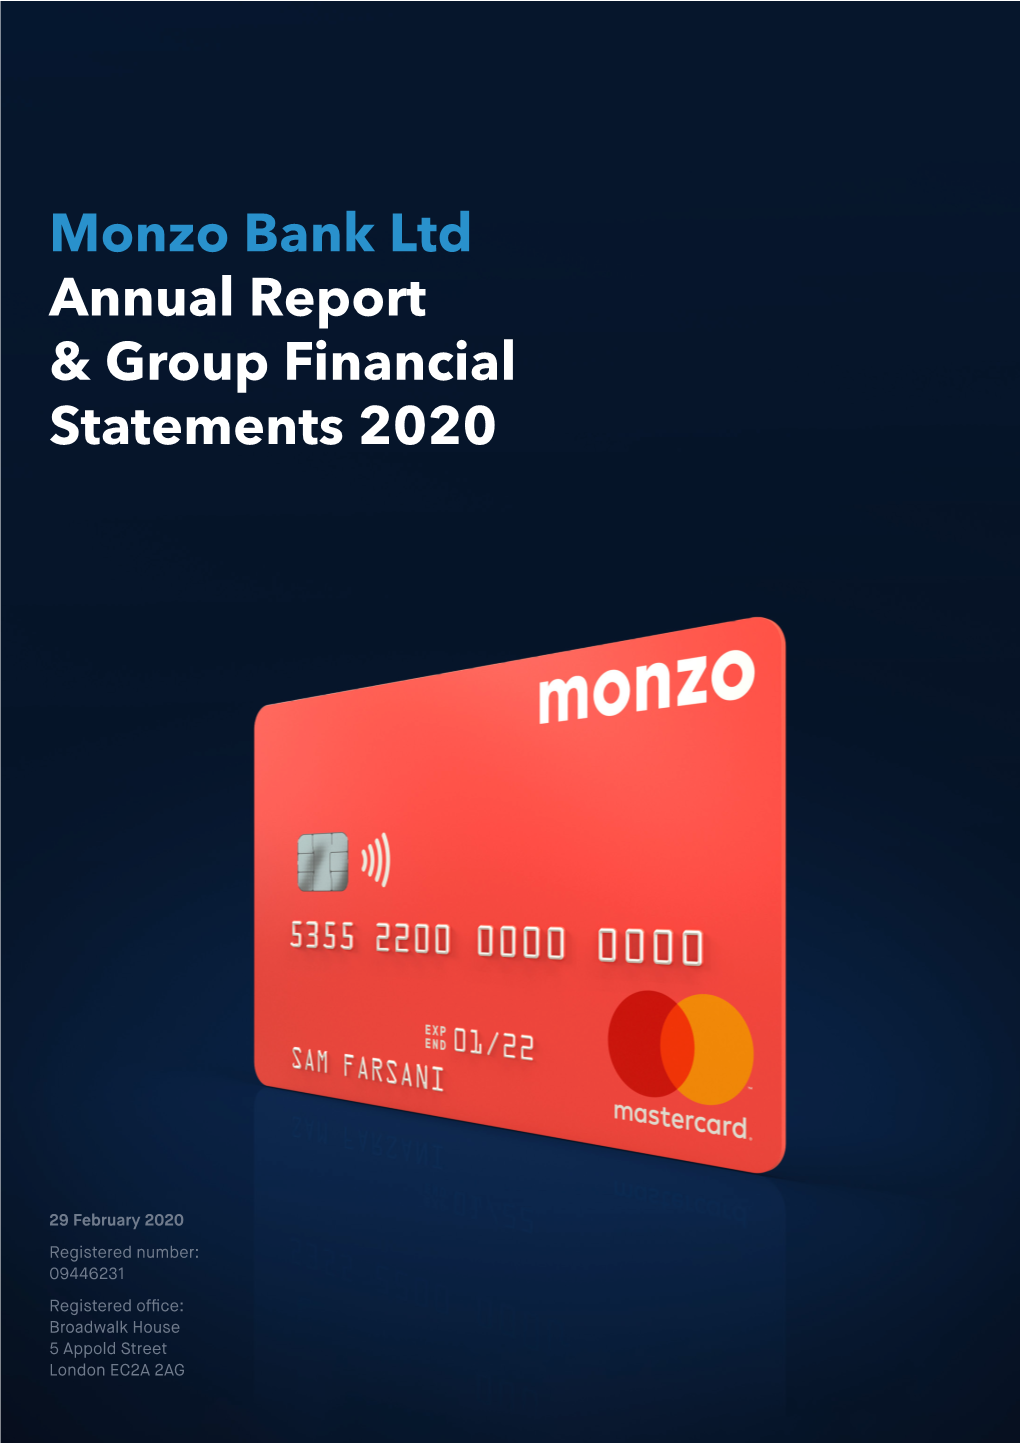 Monzo Bank Ltd Annual Report & Group Financial Statements 2020